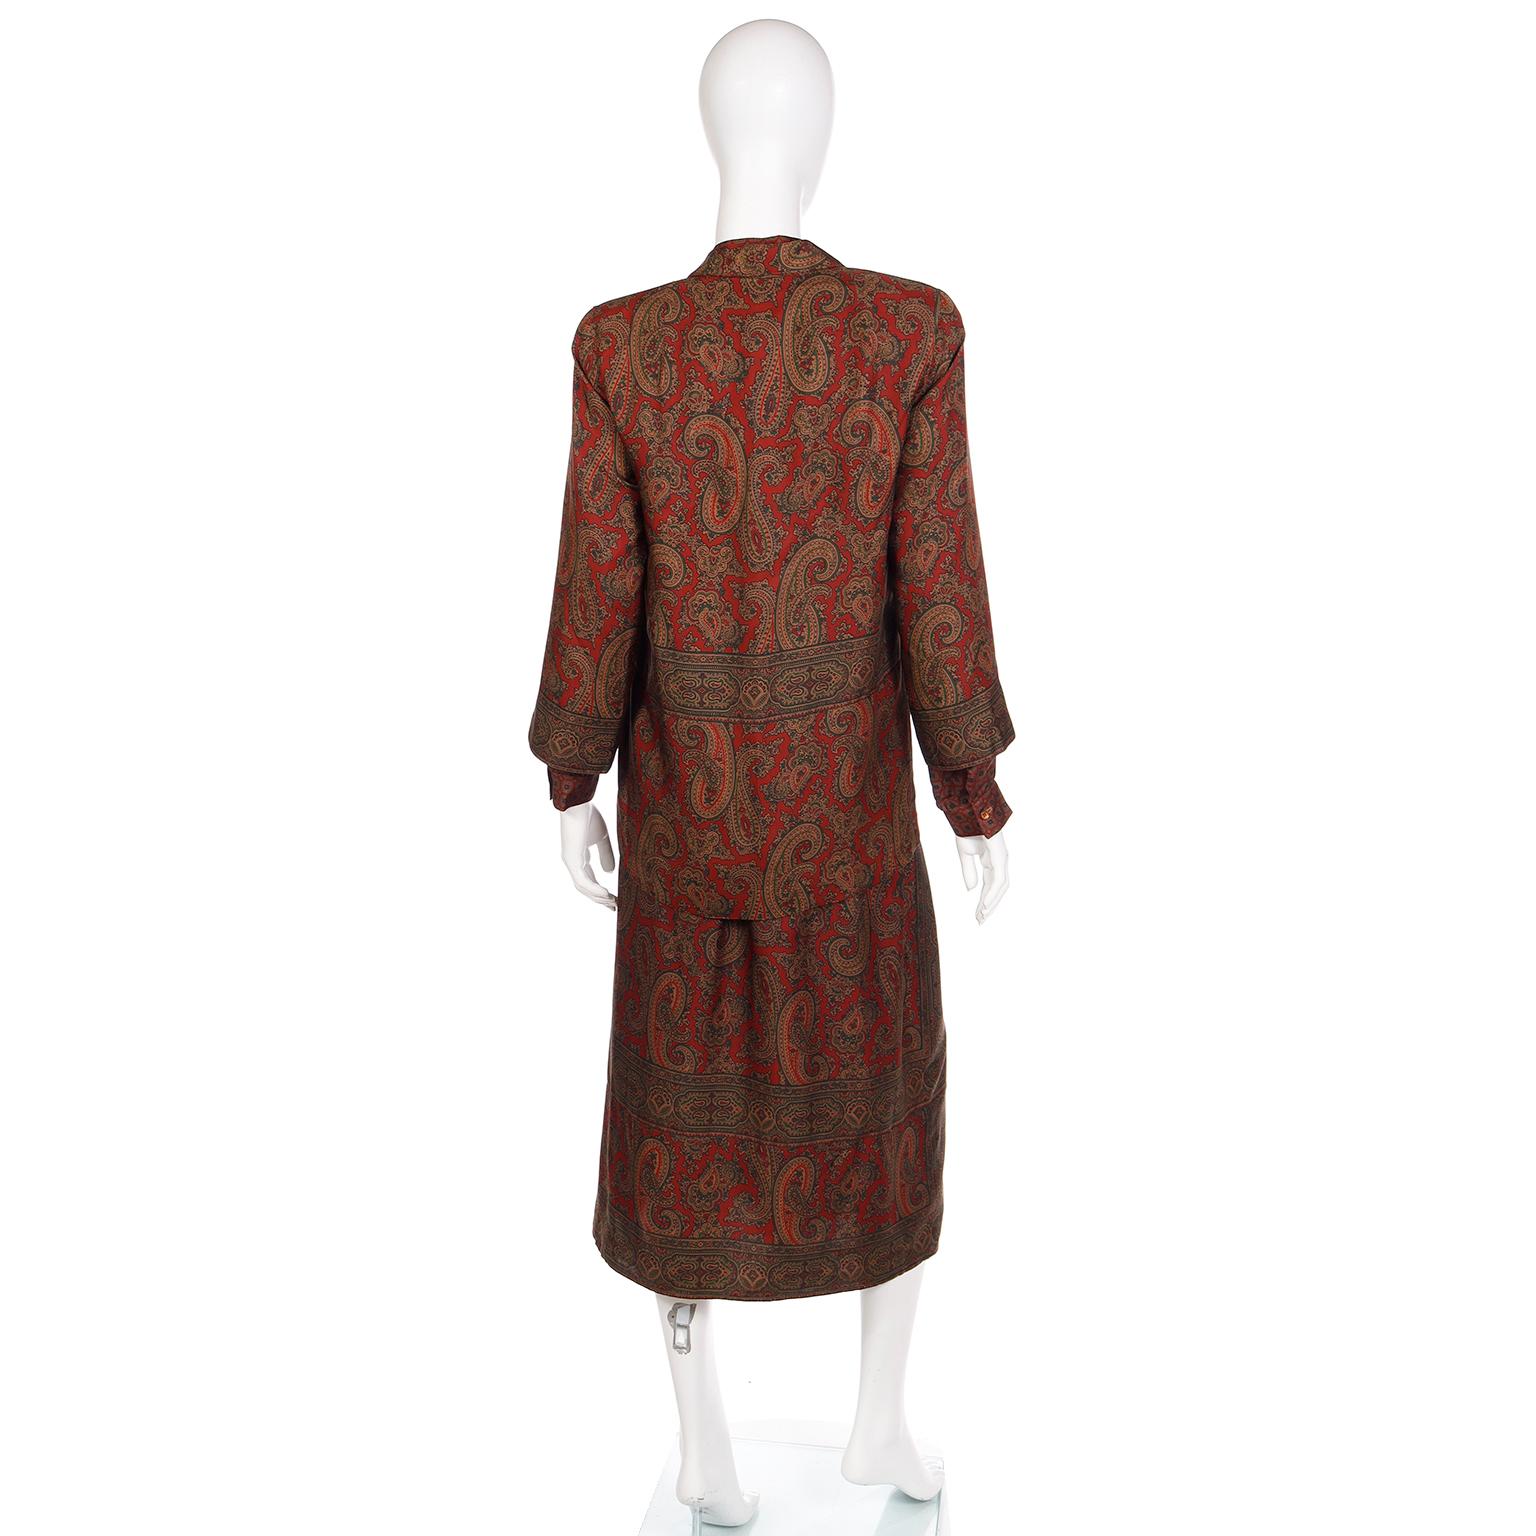 Women's Anne Klein 1970s 3 Pc Blouse & Silk Jacket & Skirt Burgundy Paisley Print Outfit For Sale